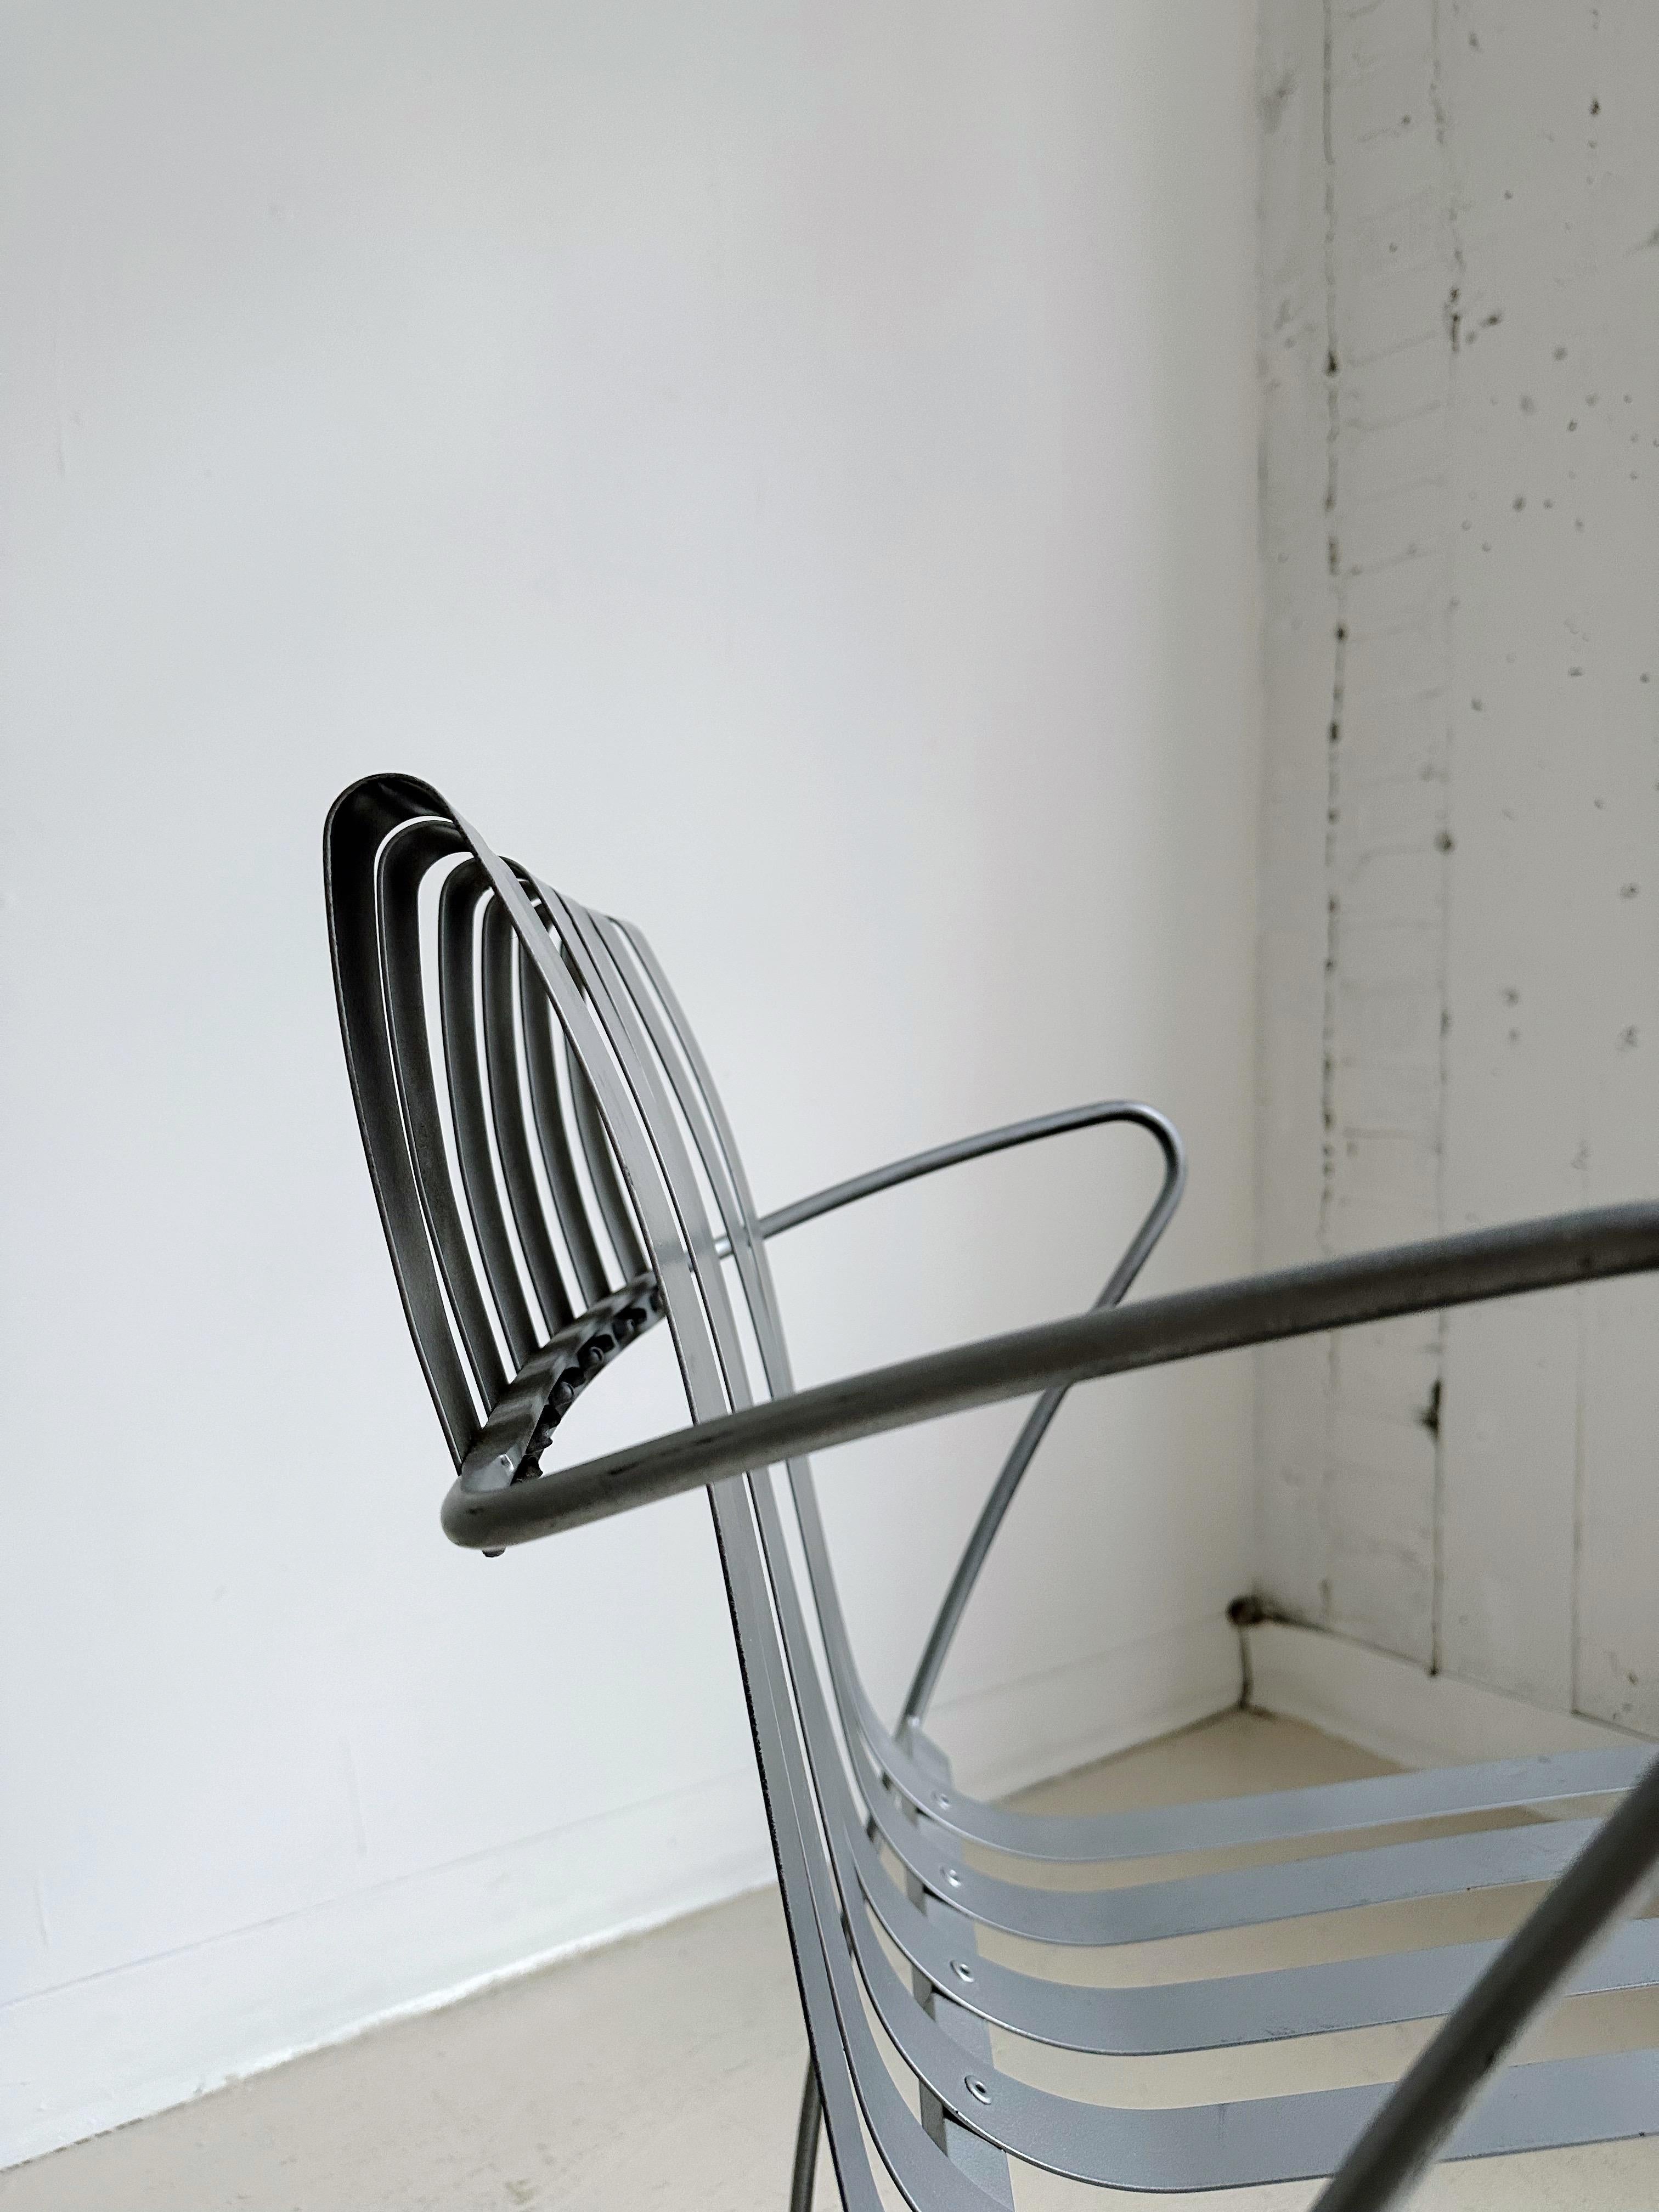 Handmade Sculptural Powder Coated Steel Chair, One of a Kind

//


Dimensions:

21”W x 22”D x 30.5”H  - seat height 17.5